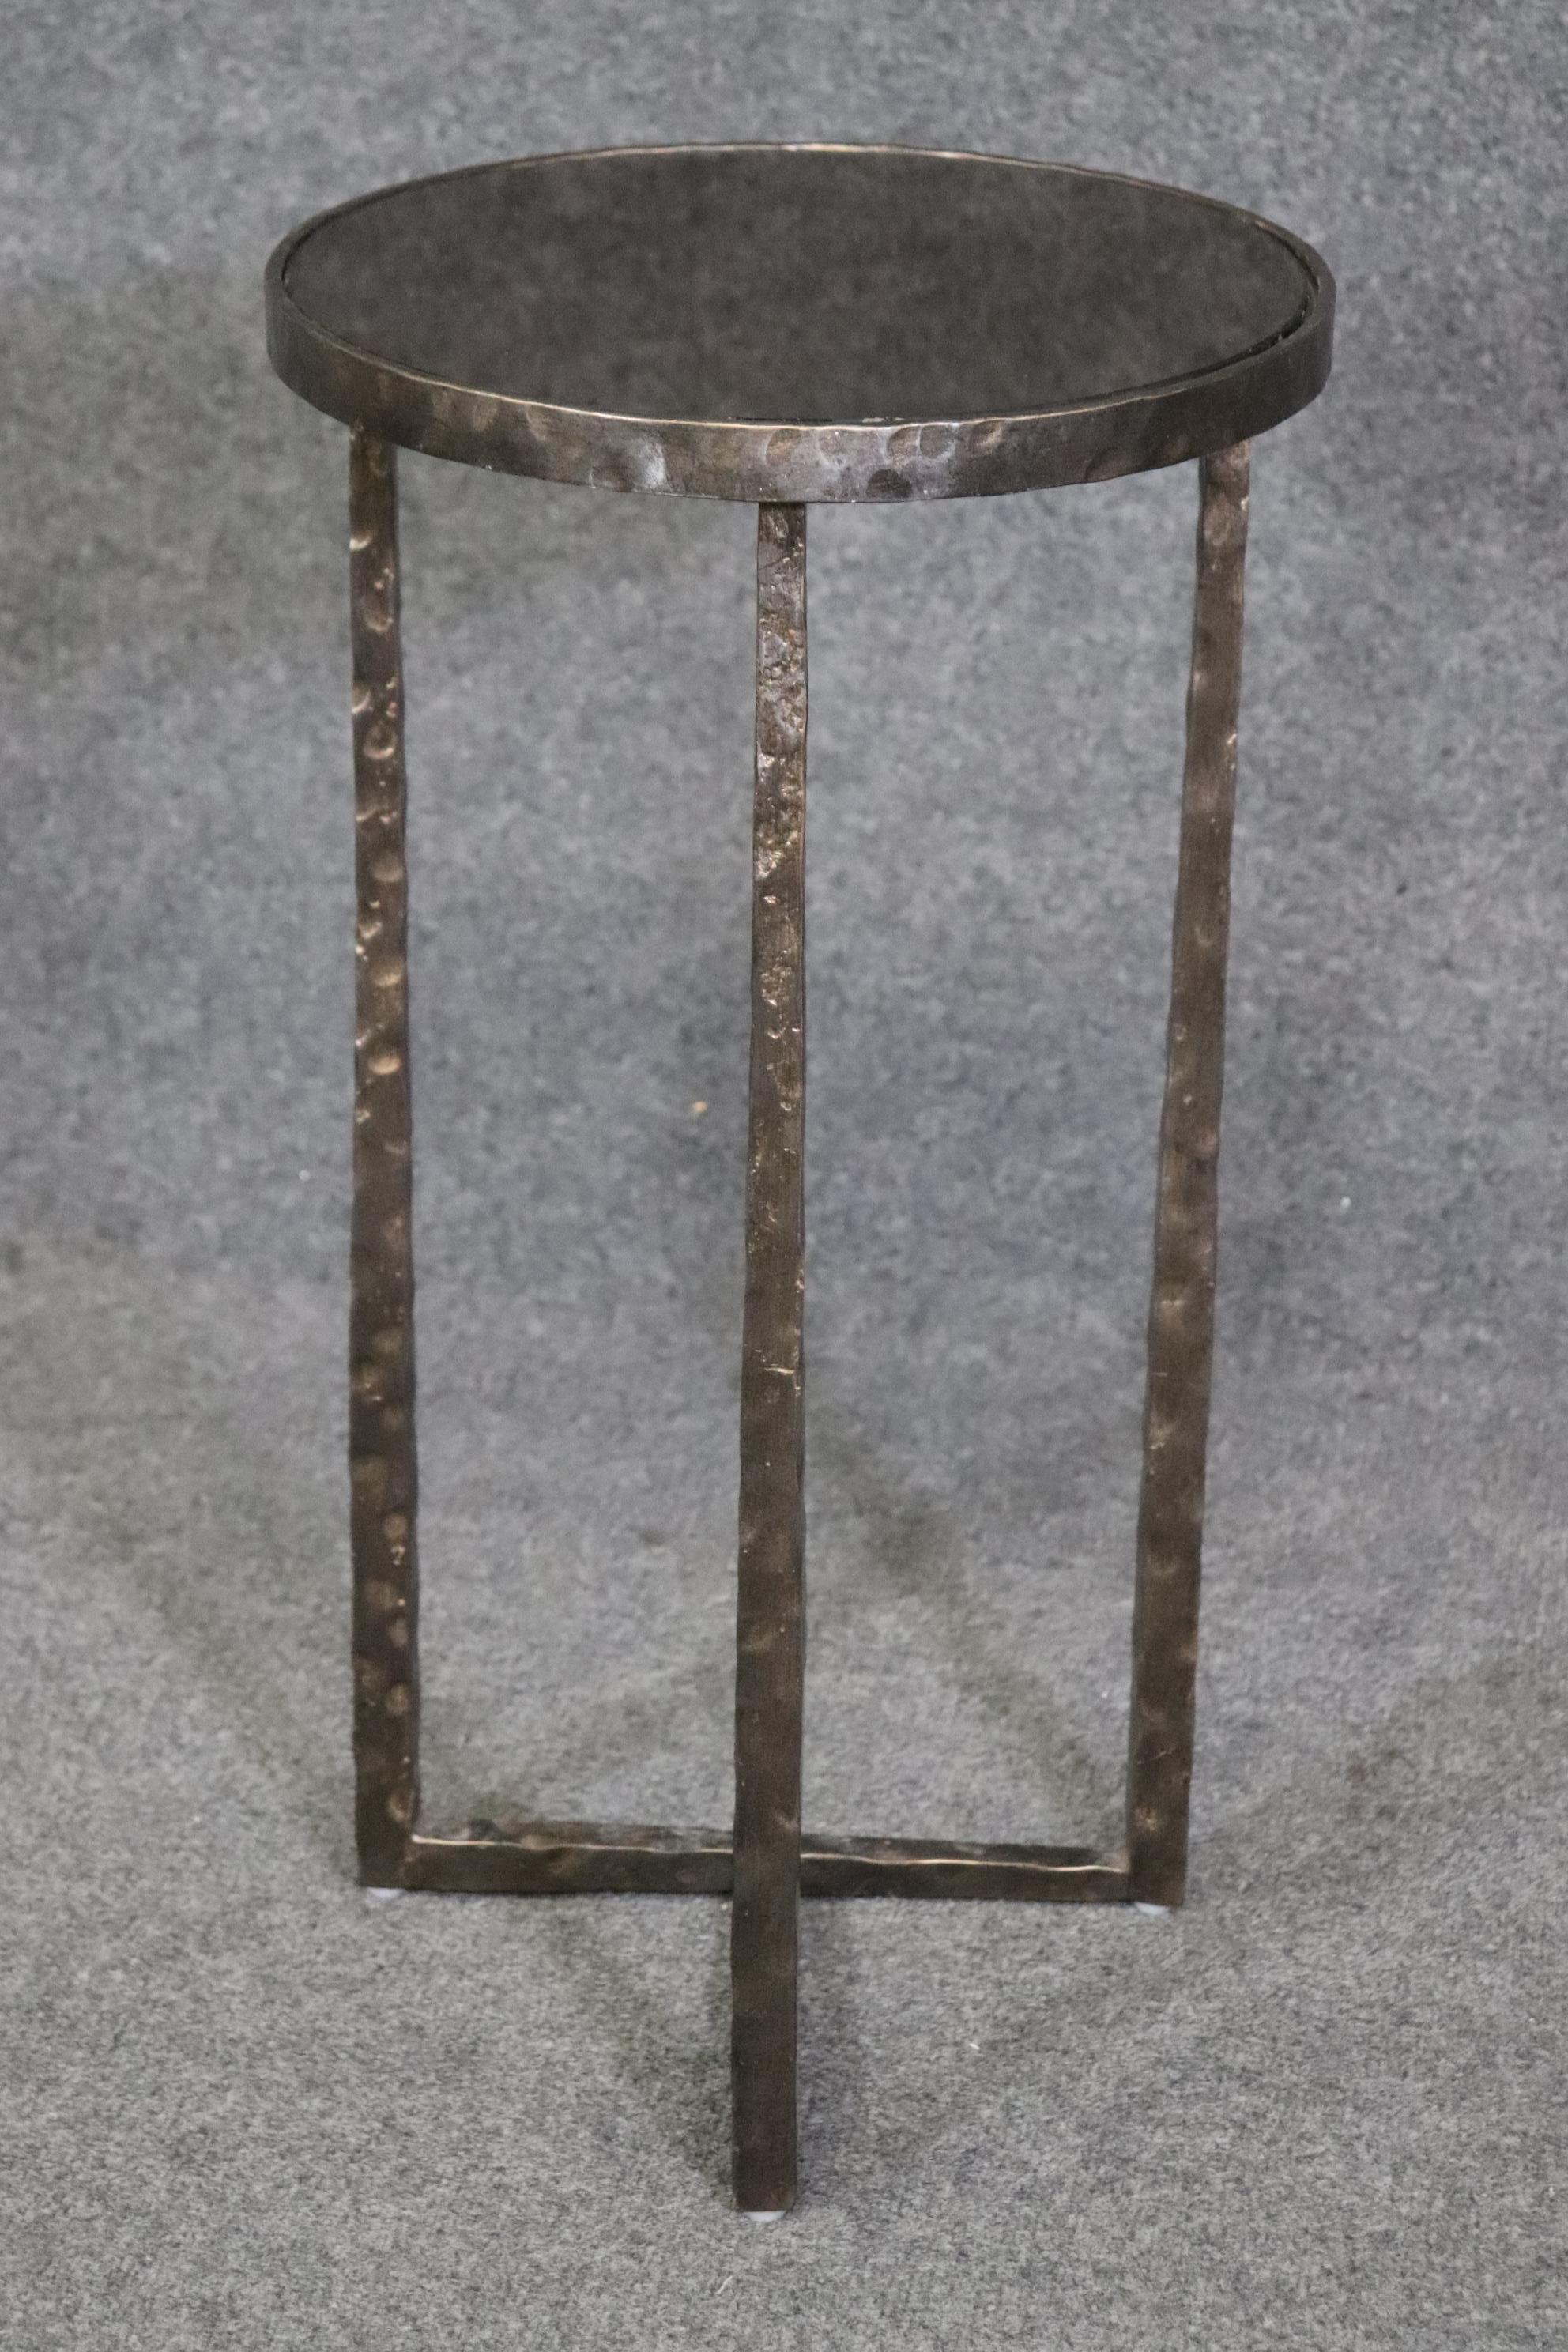 Dimensions- H: 26in W: 14in D: 14in
This Mid-Century Modern Giacometti Style Mirrored Top End Table, Pedestal is a wonderful example of Mid-Century Modern Furniture and Decor! This piece is made in the style of one of the most influential artists